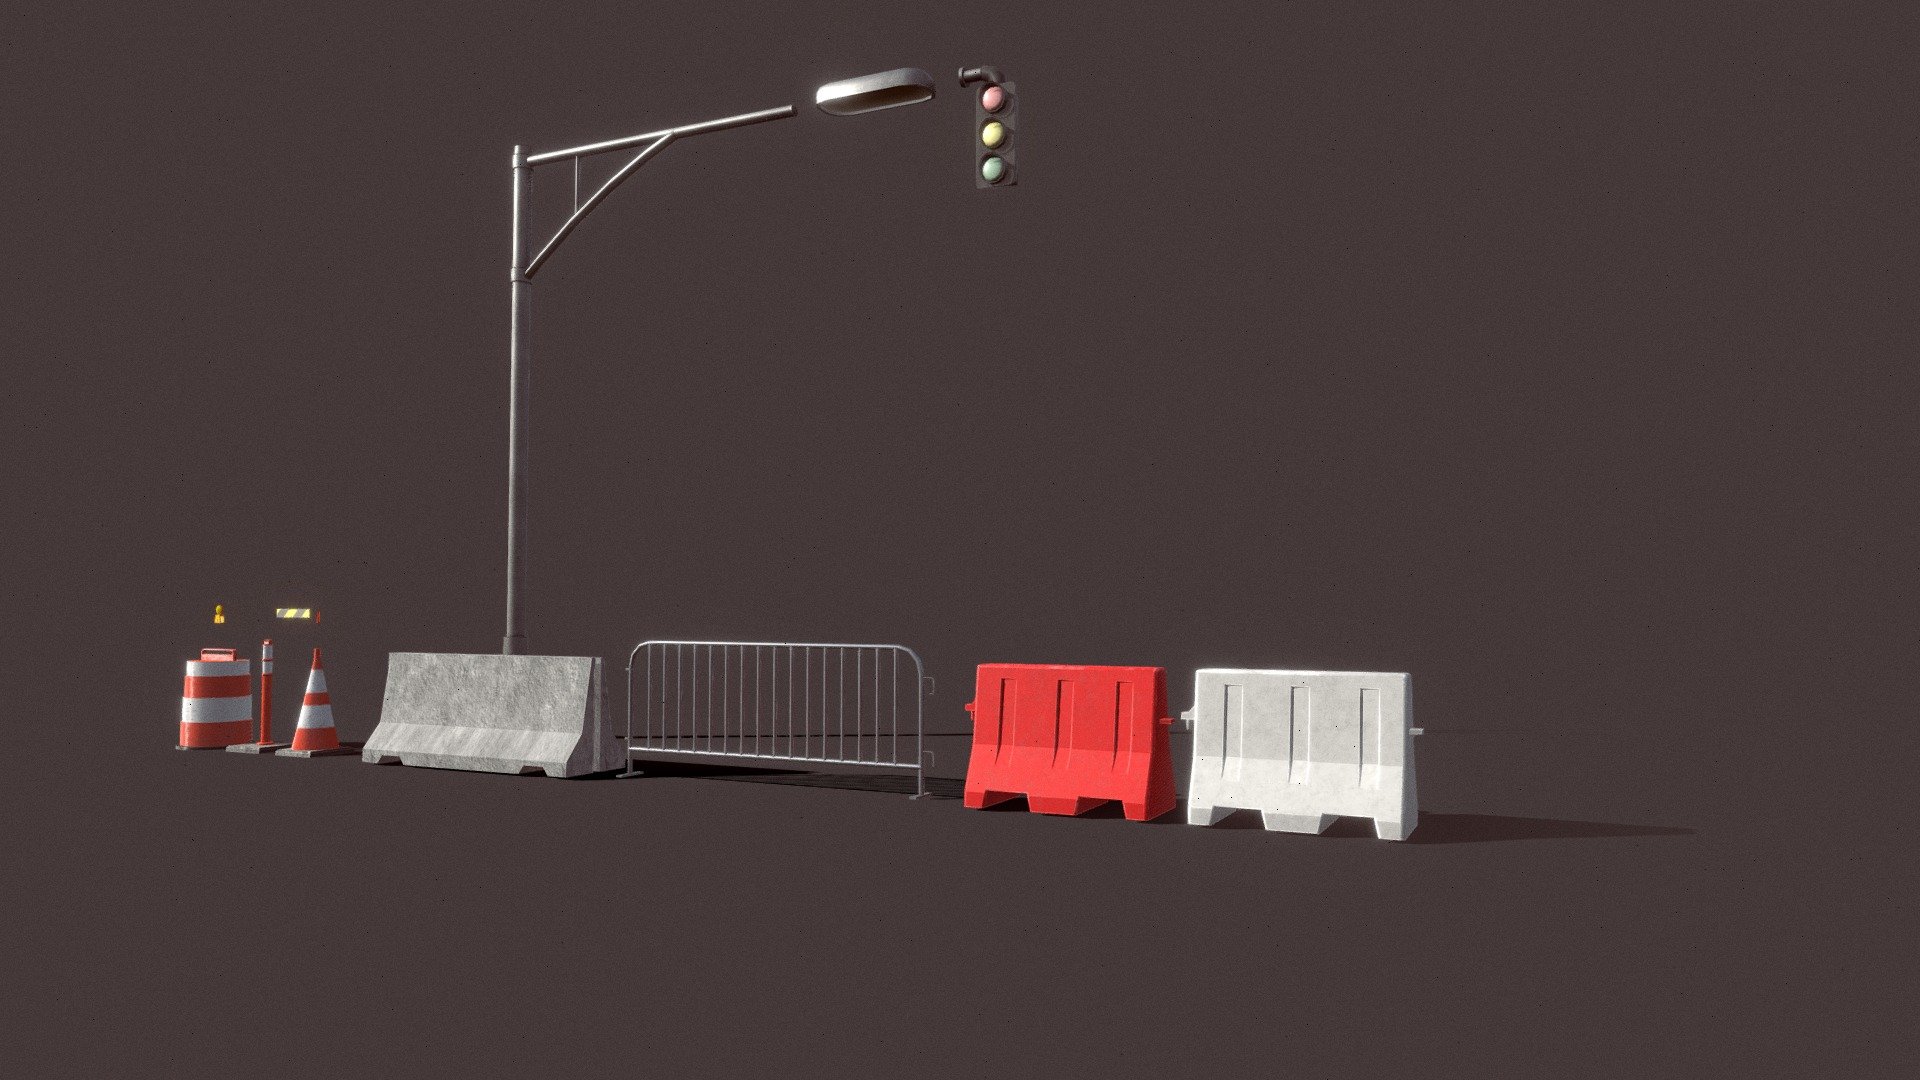 Introducing our amazing 3D Asset Package:



Our package includes a modular Traffic Light with a lamp and a signal, as well as cones and barriers. It is designed to enhance the quality and realism of your projects, making it a perfect solution for any scene involving traffic, construction, or road safety 3d model